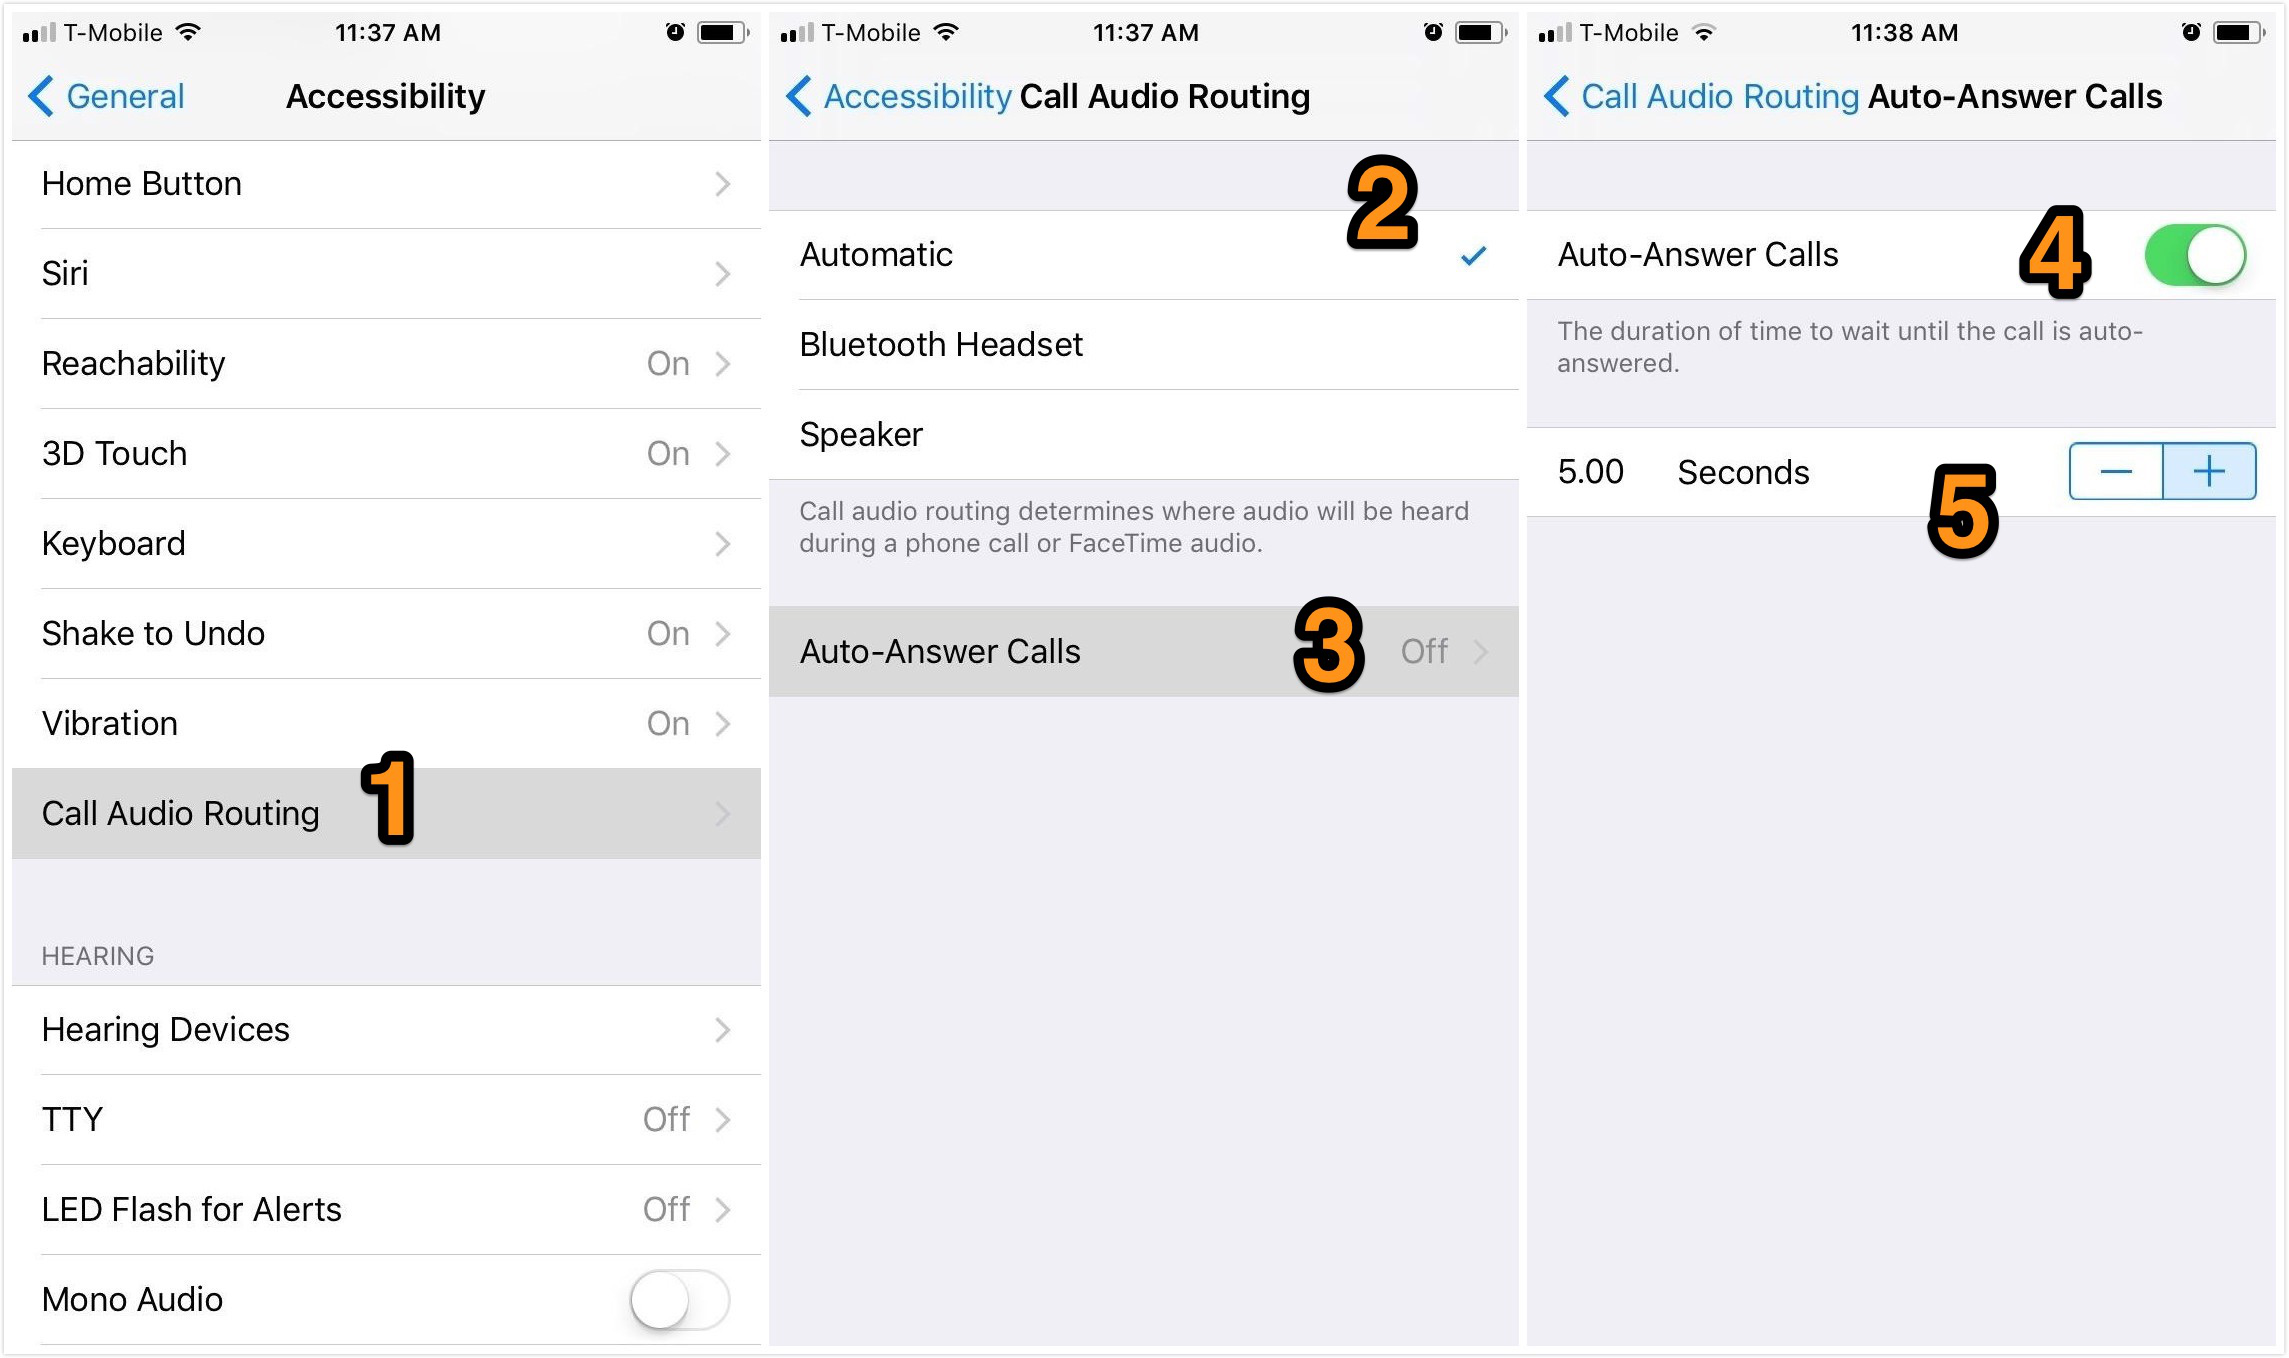 How to Enable Auto-answer Calls on iPhone in iOS 11